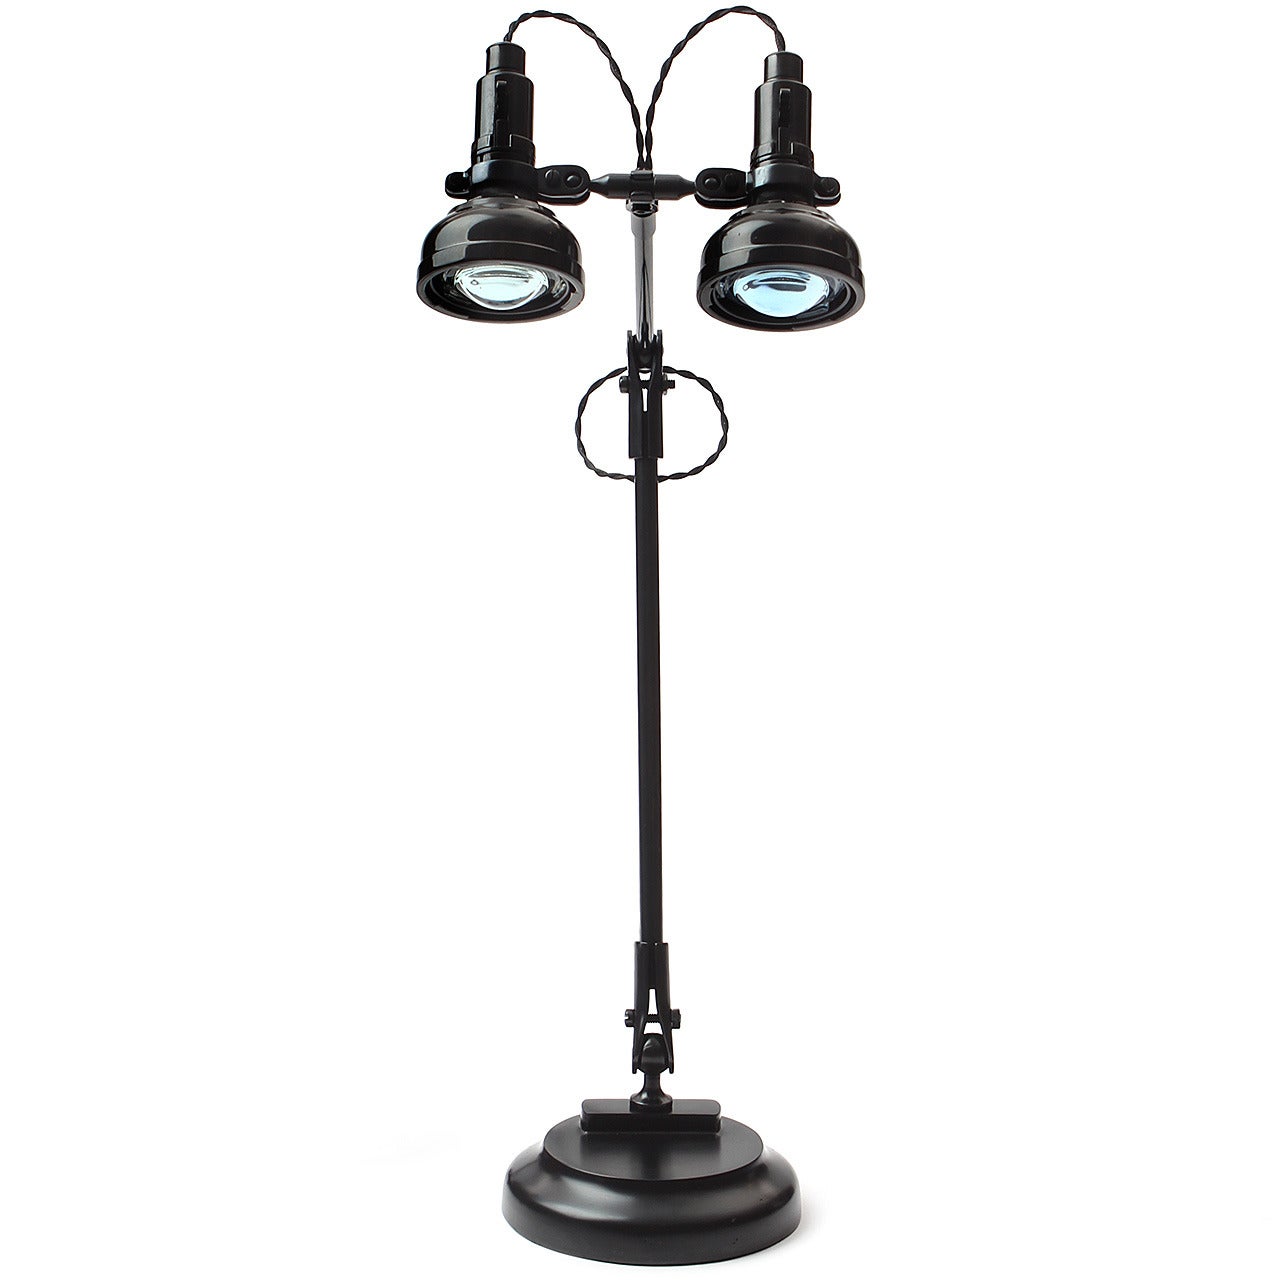 Articulating Table Lamp